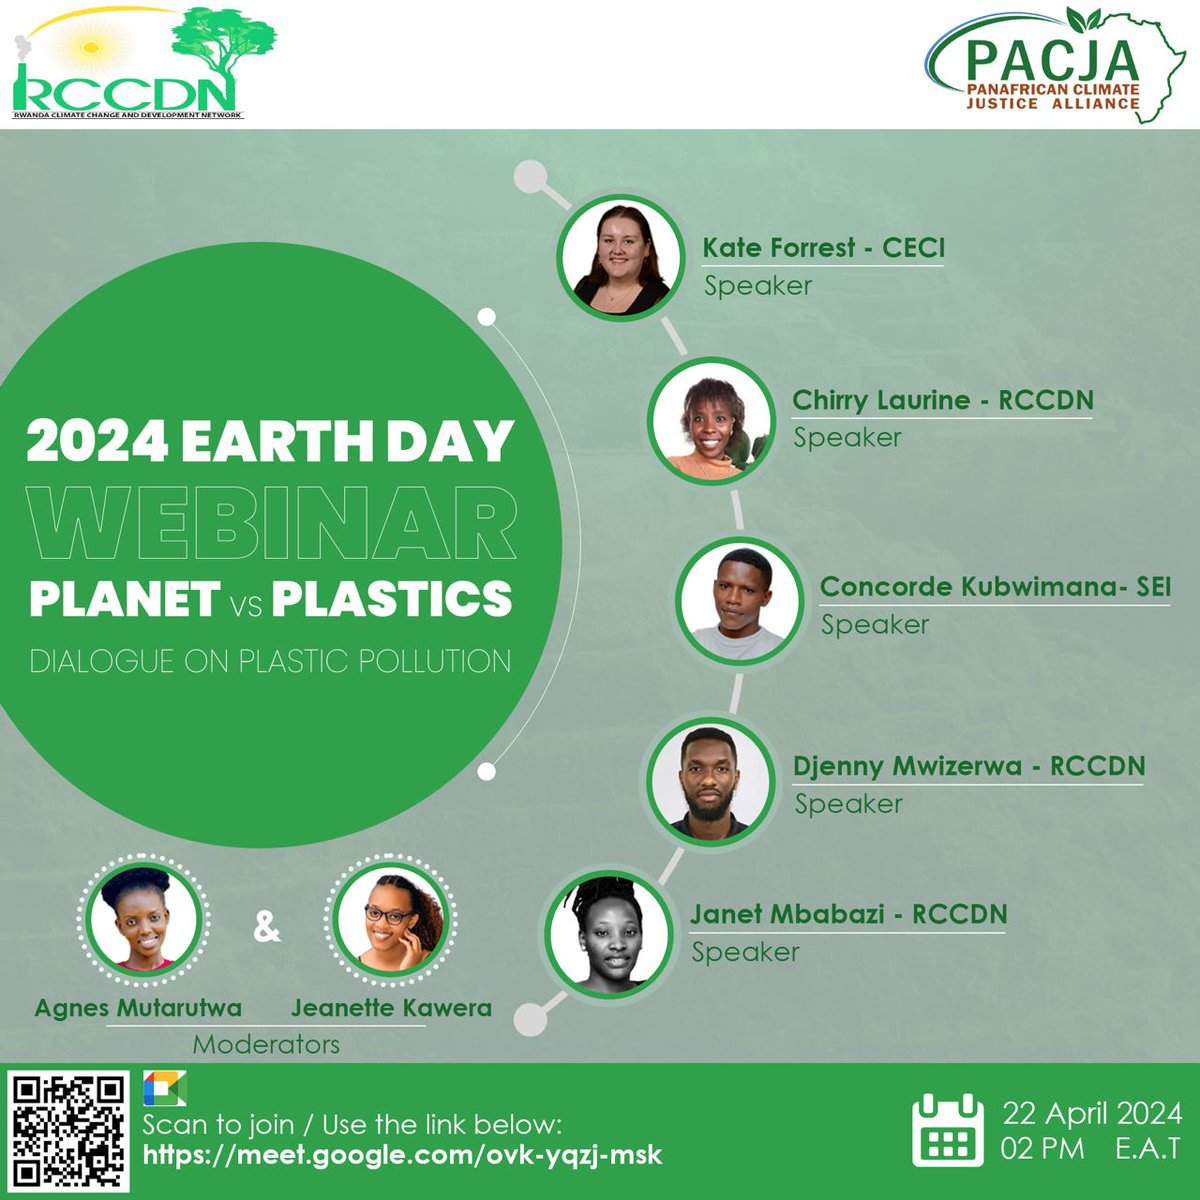 In celebration of the Earth Day 2024 themed 'Planet vs Plastics' join RCCDN today in this webinar where the youth will head a dialogue on plastic pollution. To join the meeting on Google Meet, click this link: meet.google.com/ovk-yqzj-msk Or open Meet & enter this code: ovk-yqzj-msk